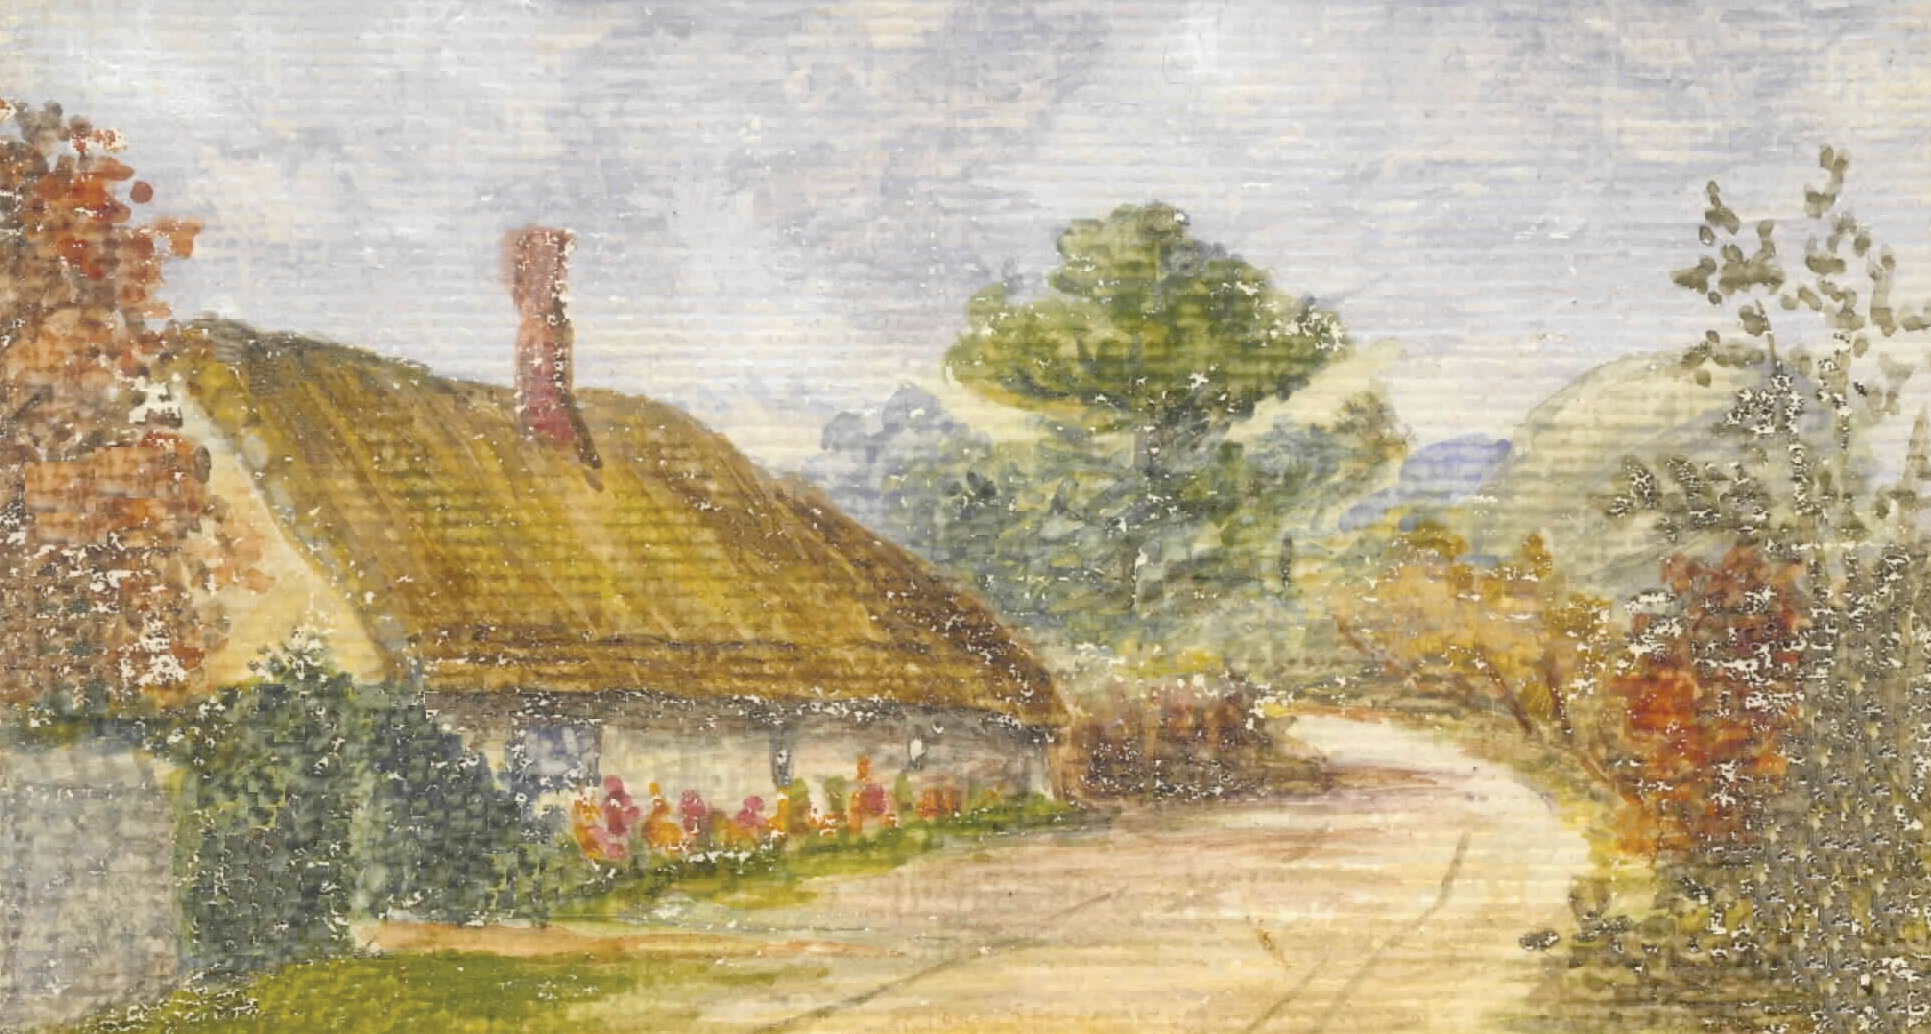 Binsted poorhouse painted by Charlotte Read